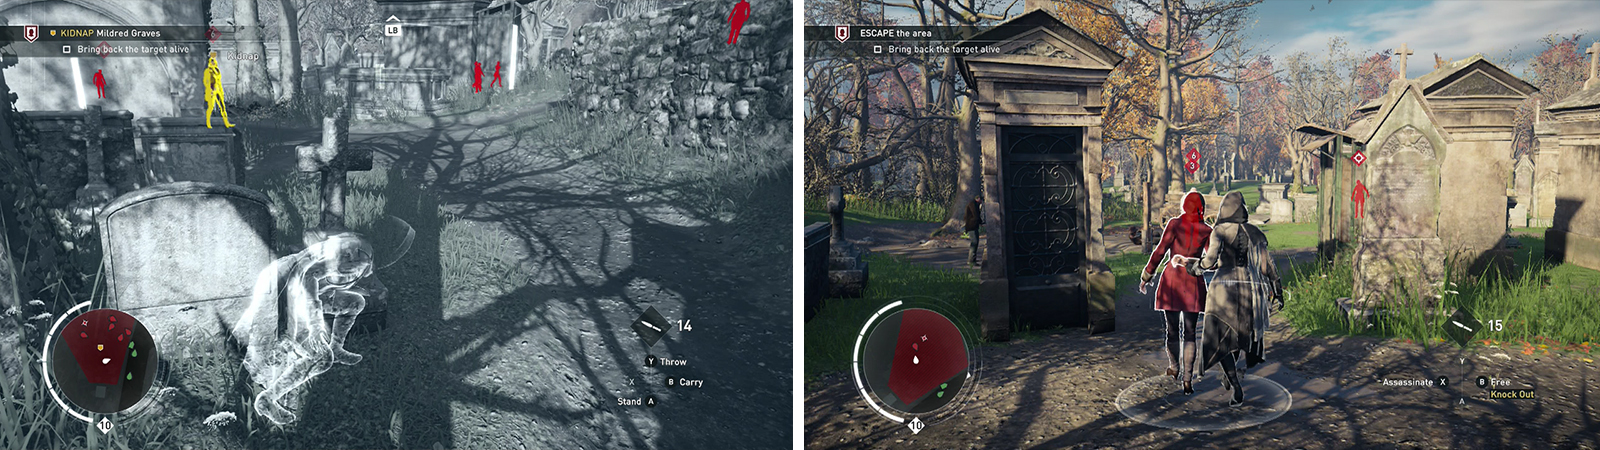 Enter the graveyard from the southeast for quick access tot he target (left). Once you have her, escort her from the area (right).